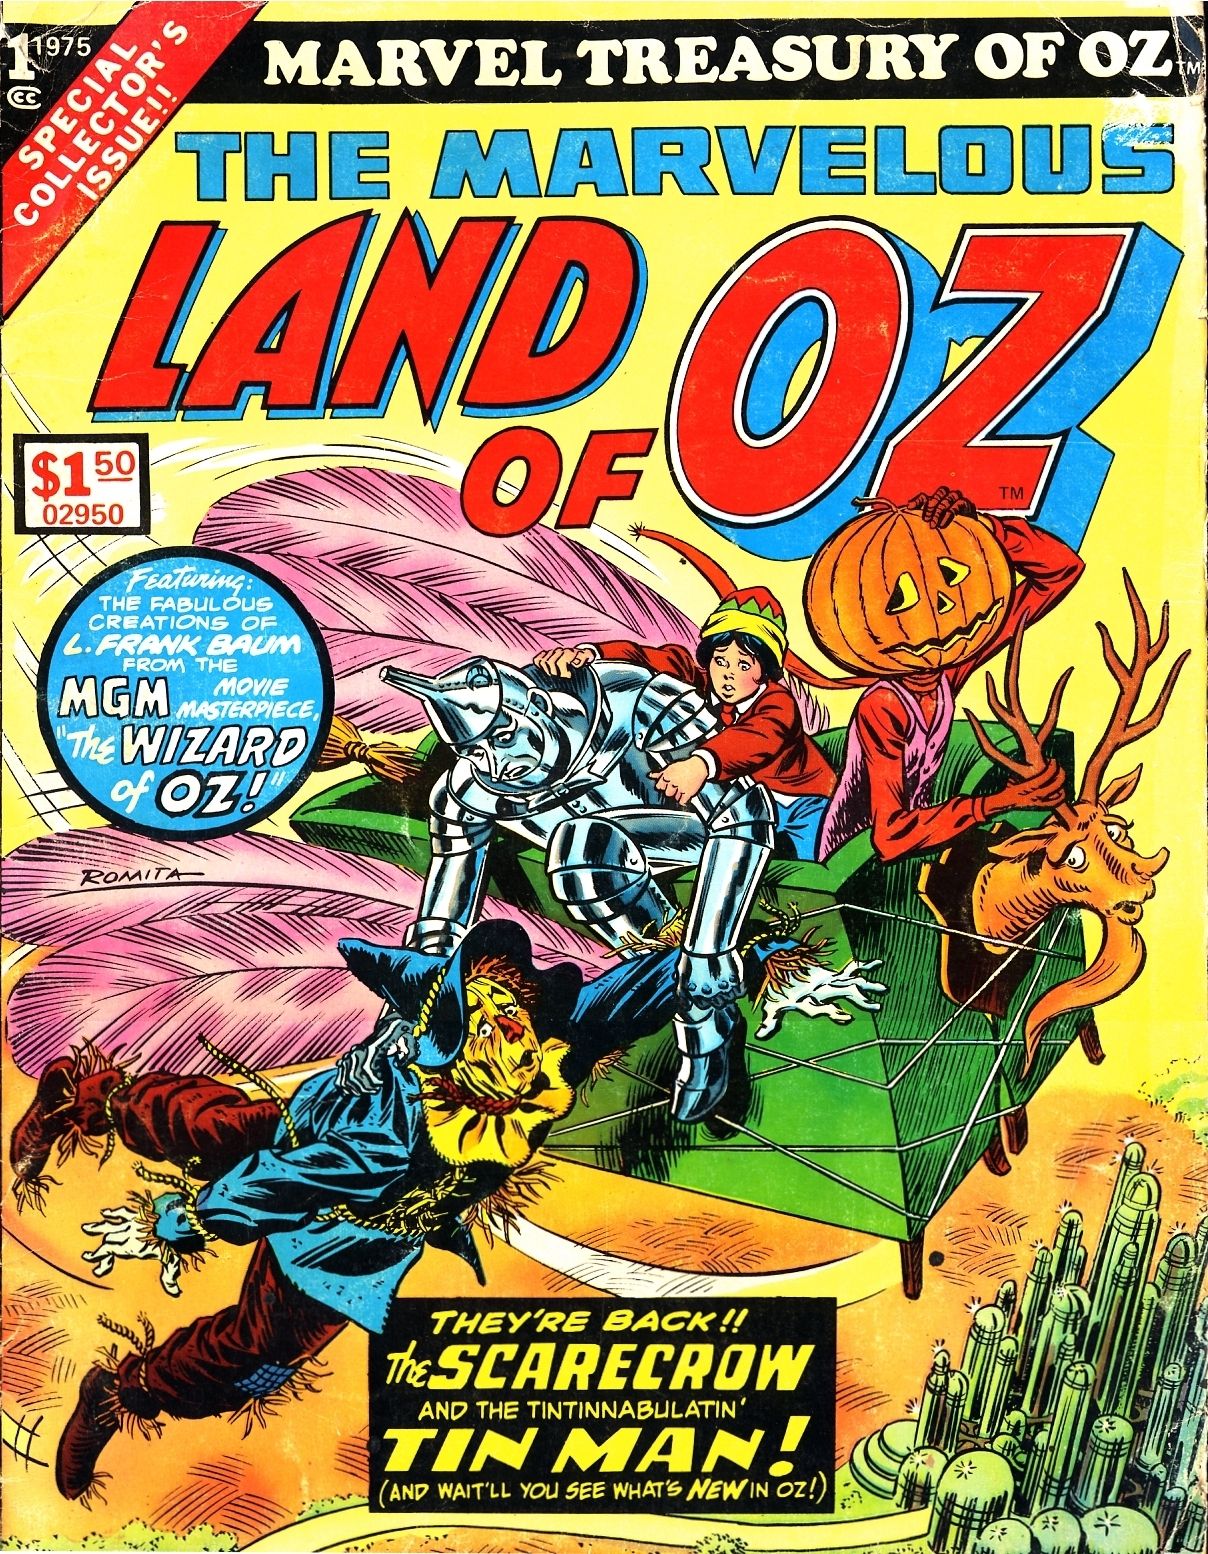 Read online Marvel Treasury of Oz featuring the Marvelous Land of Oz comic -  Issue # Full - 1